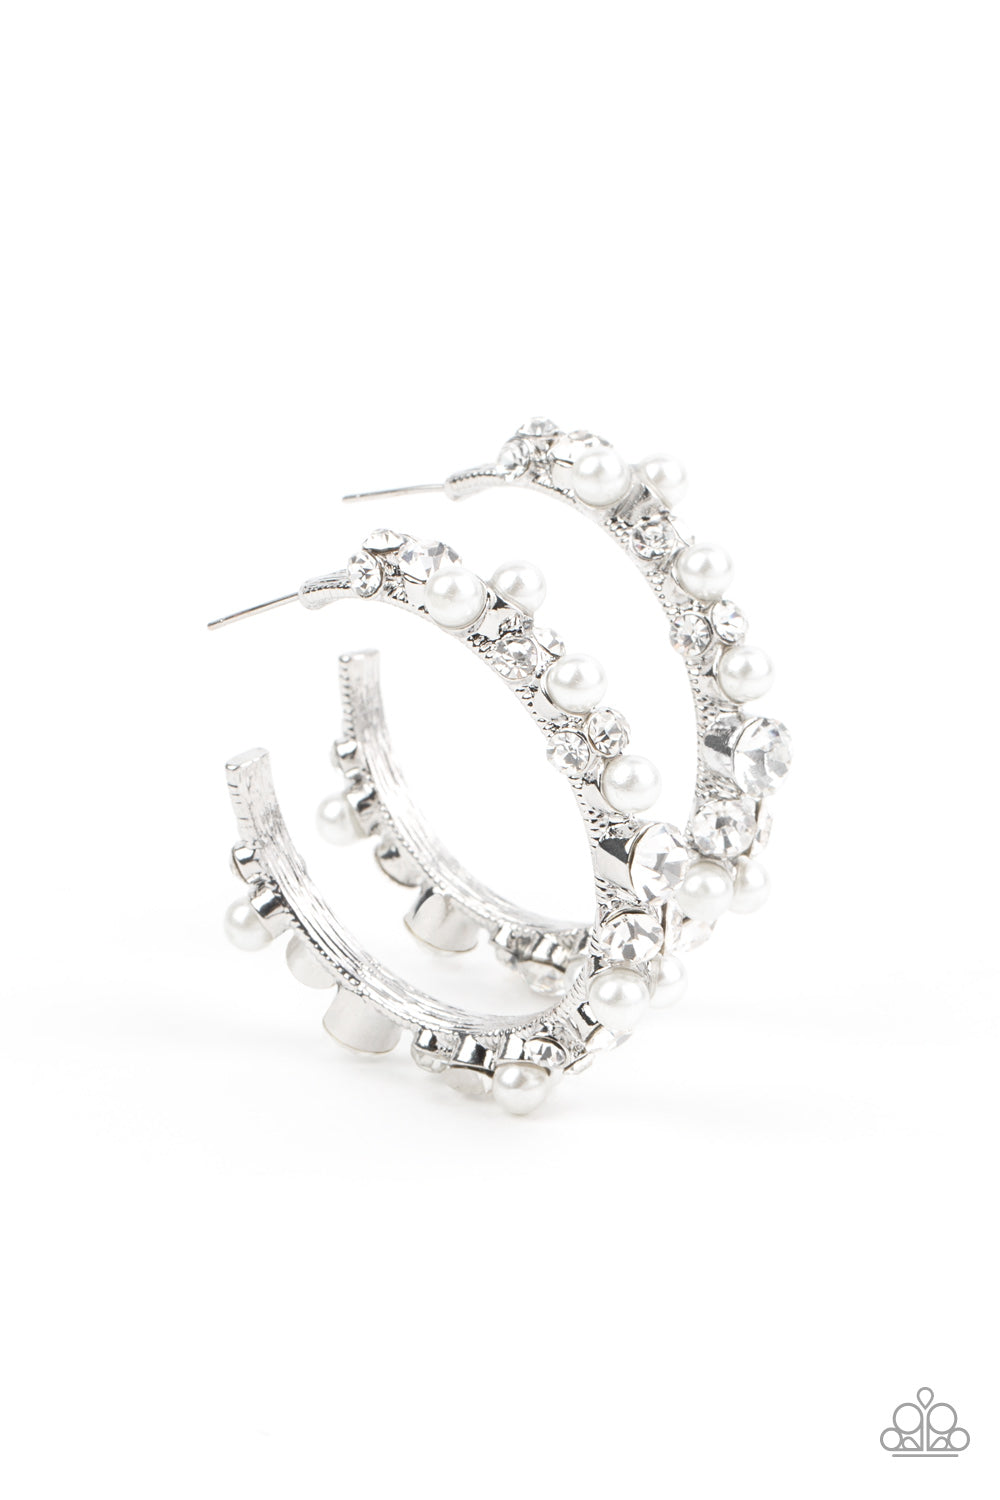 Let There Be SOCIALITE - White rhinestones/Pearl hoop earrings (September Life of the Party)